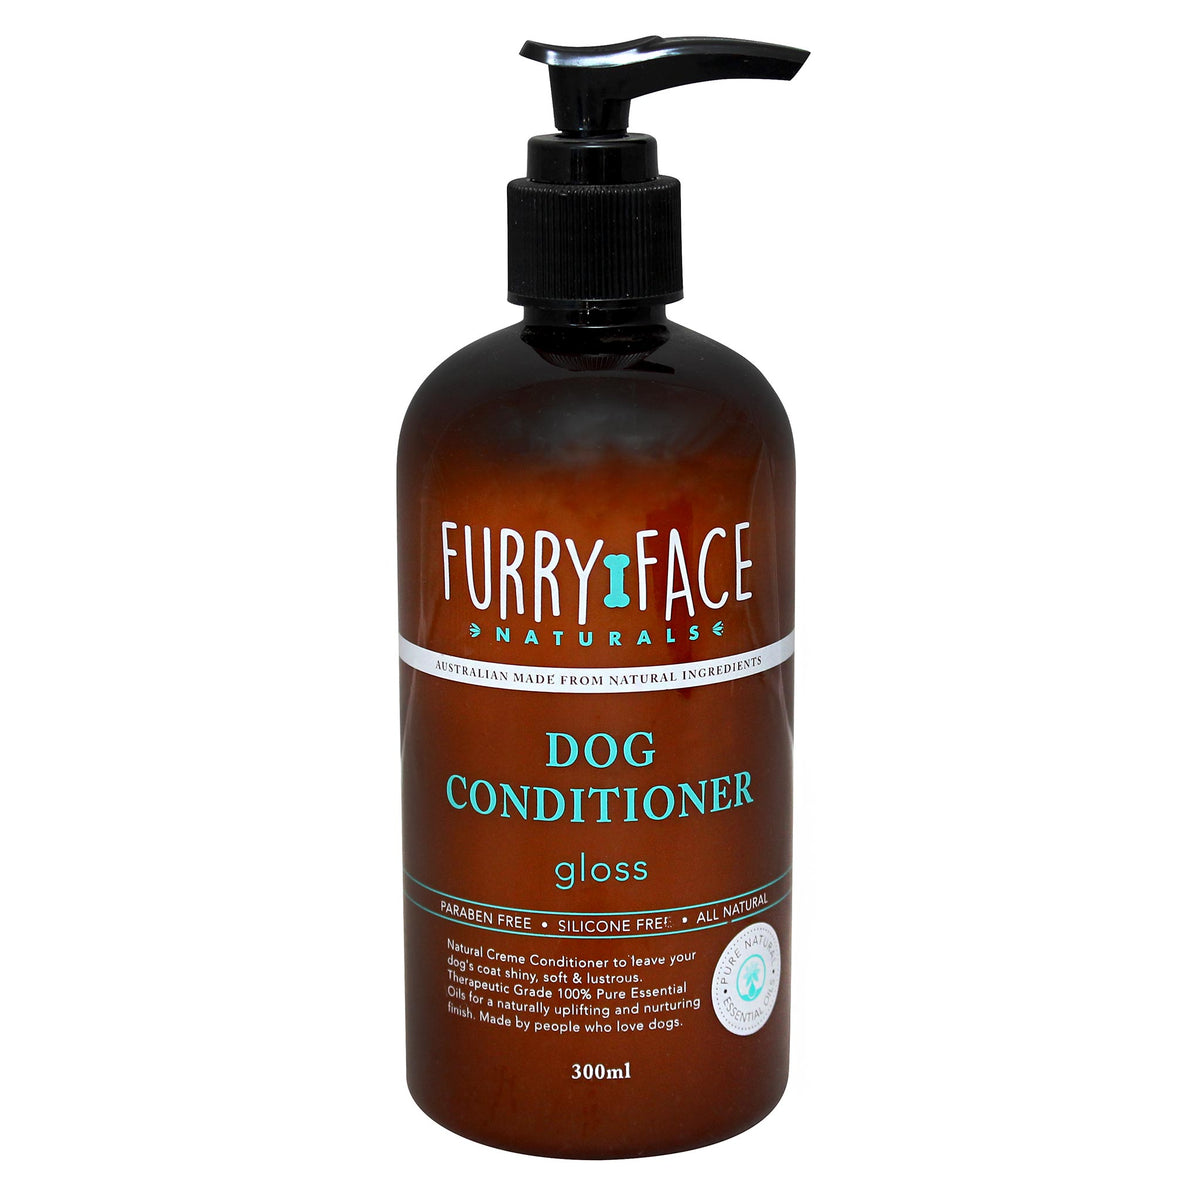 Furry Face Naturals Dog Conditioner - Gloss  300mL